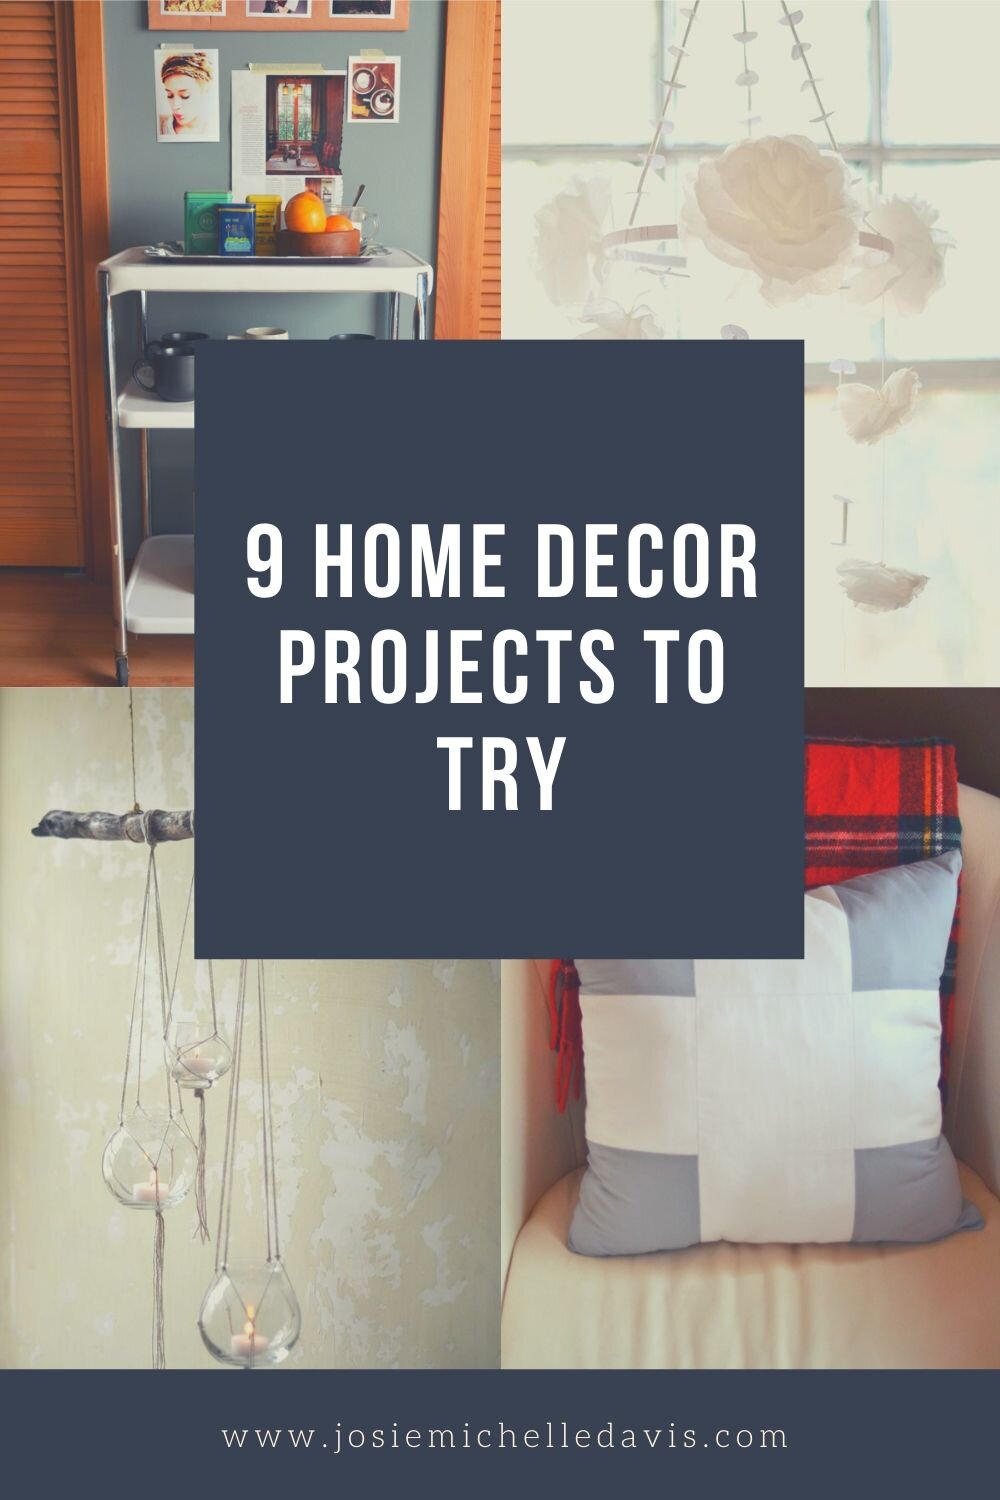 Home Decor Projects and DIYs to try - Josie Michelle Davis Blog